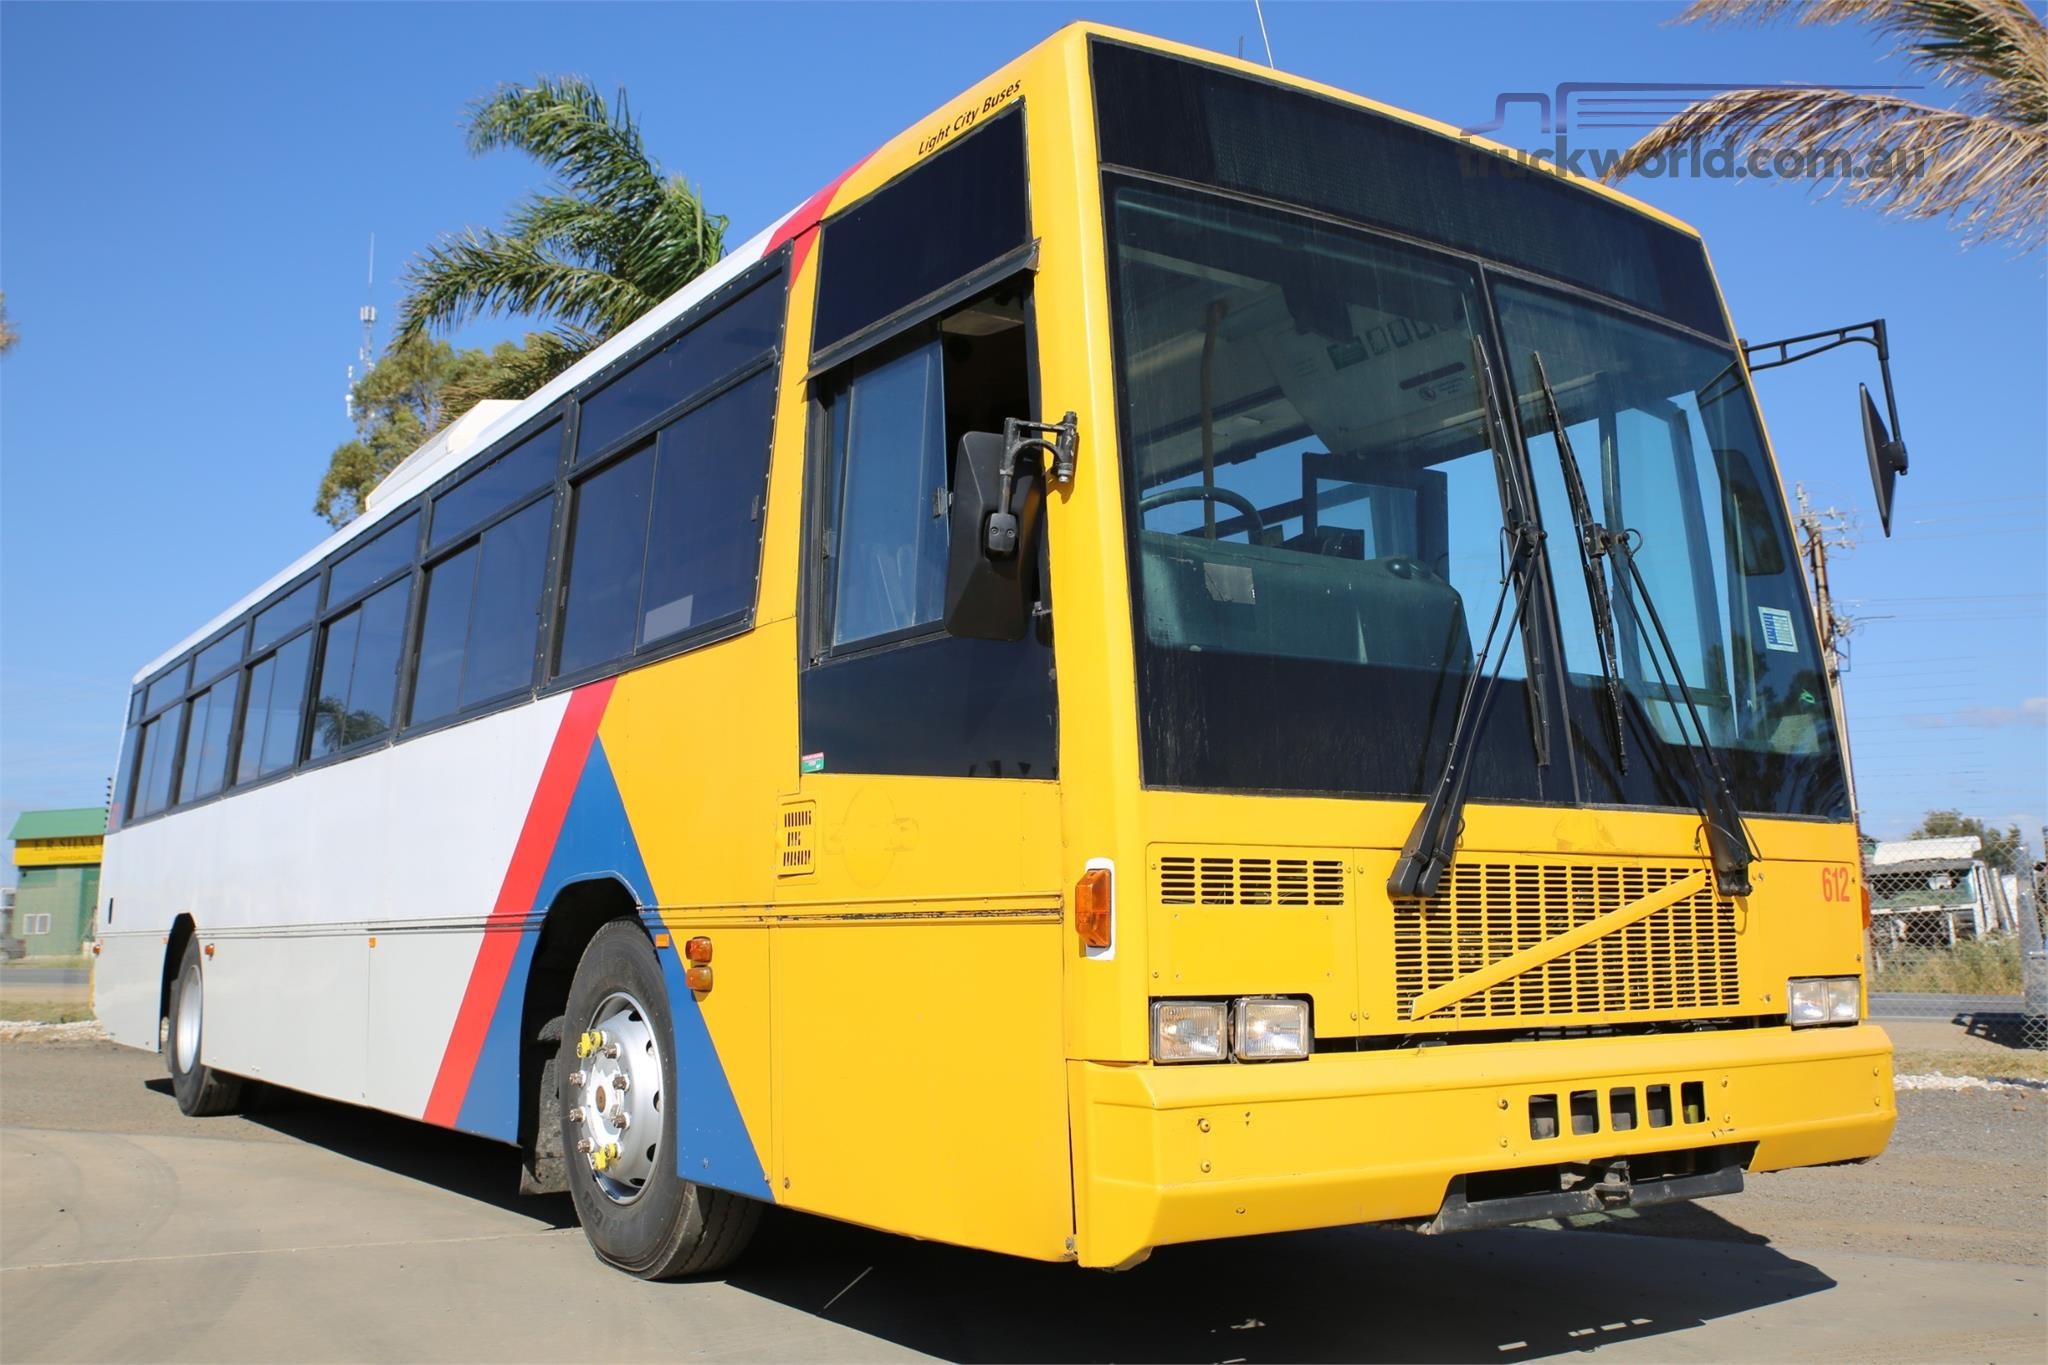 Volvo B10 City Bus bus for sale Adelaide Isuzu in South